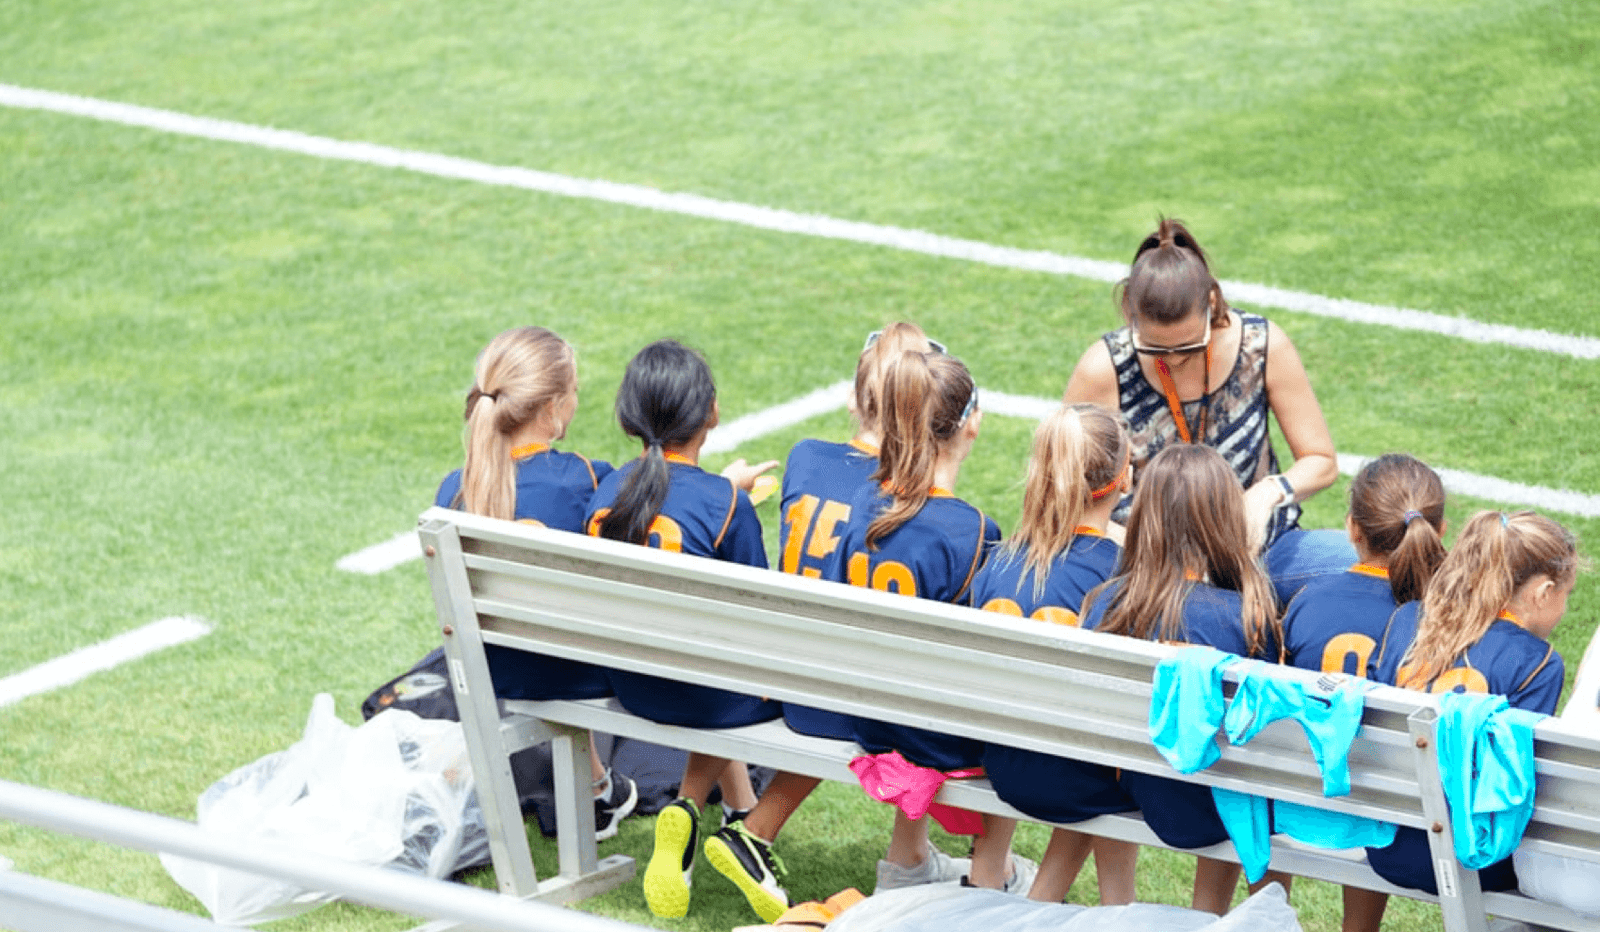 5 values that sports teach your kids to become better human beings